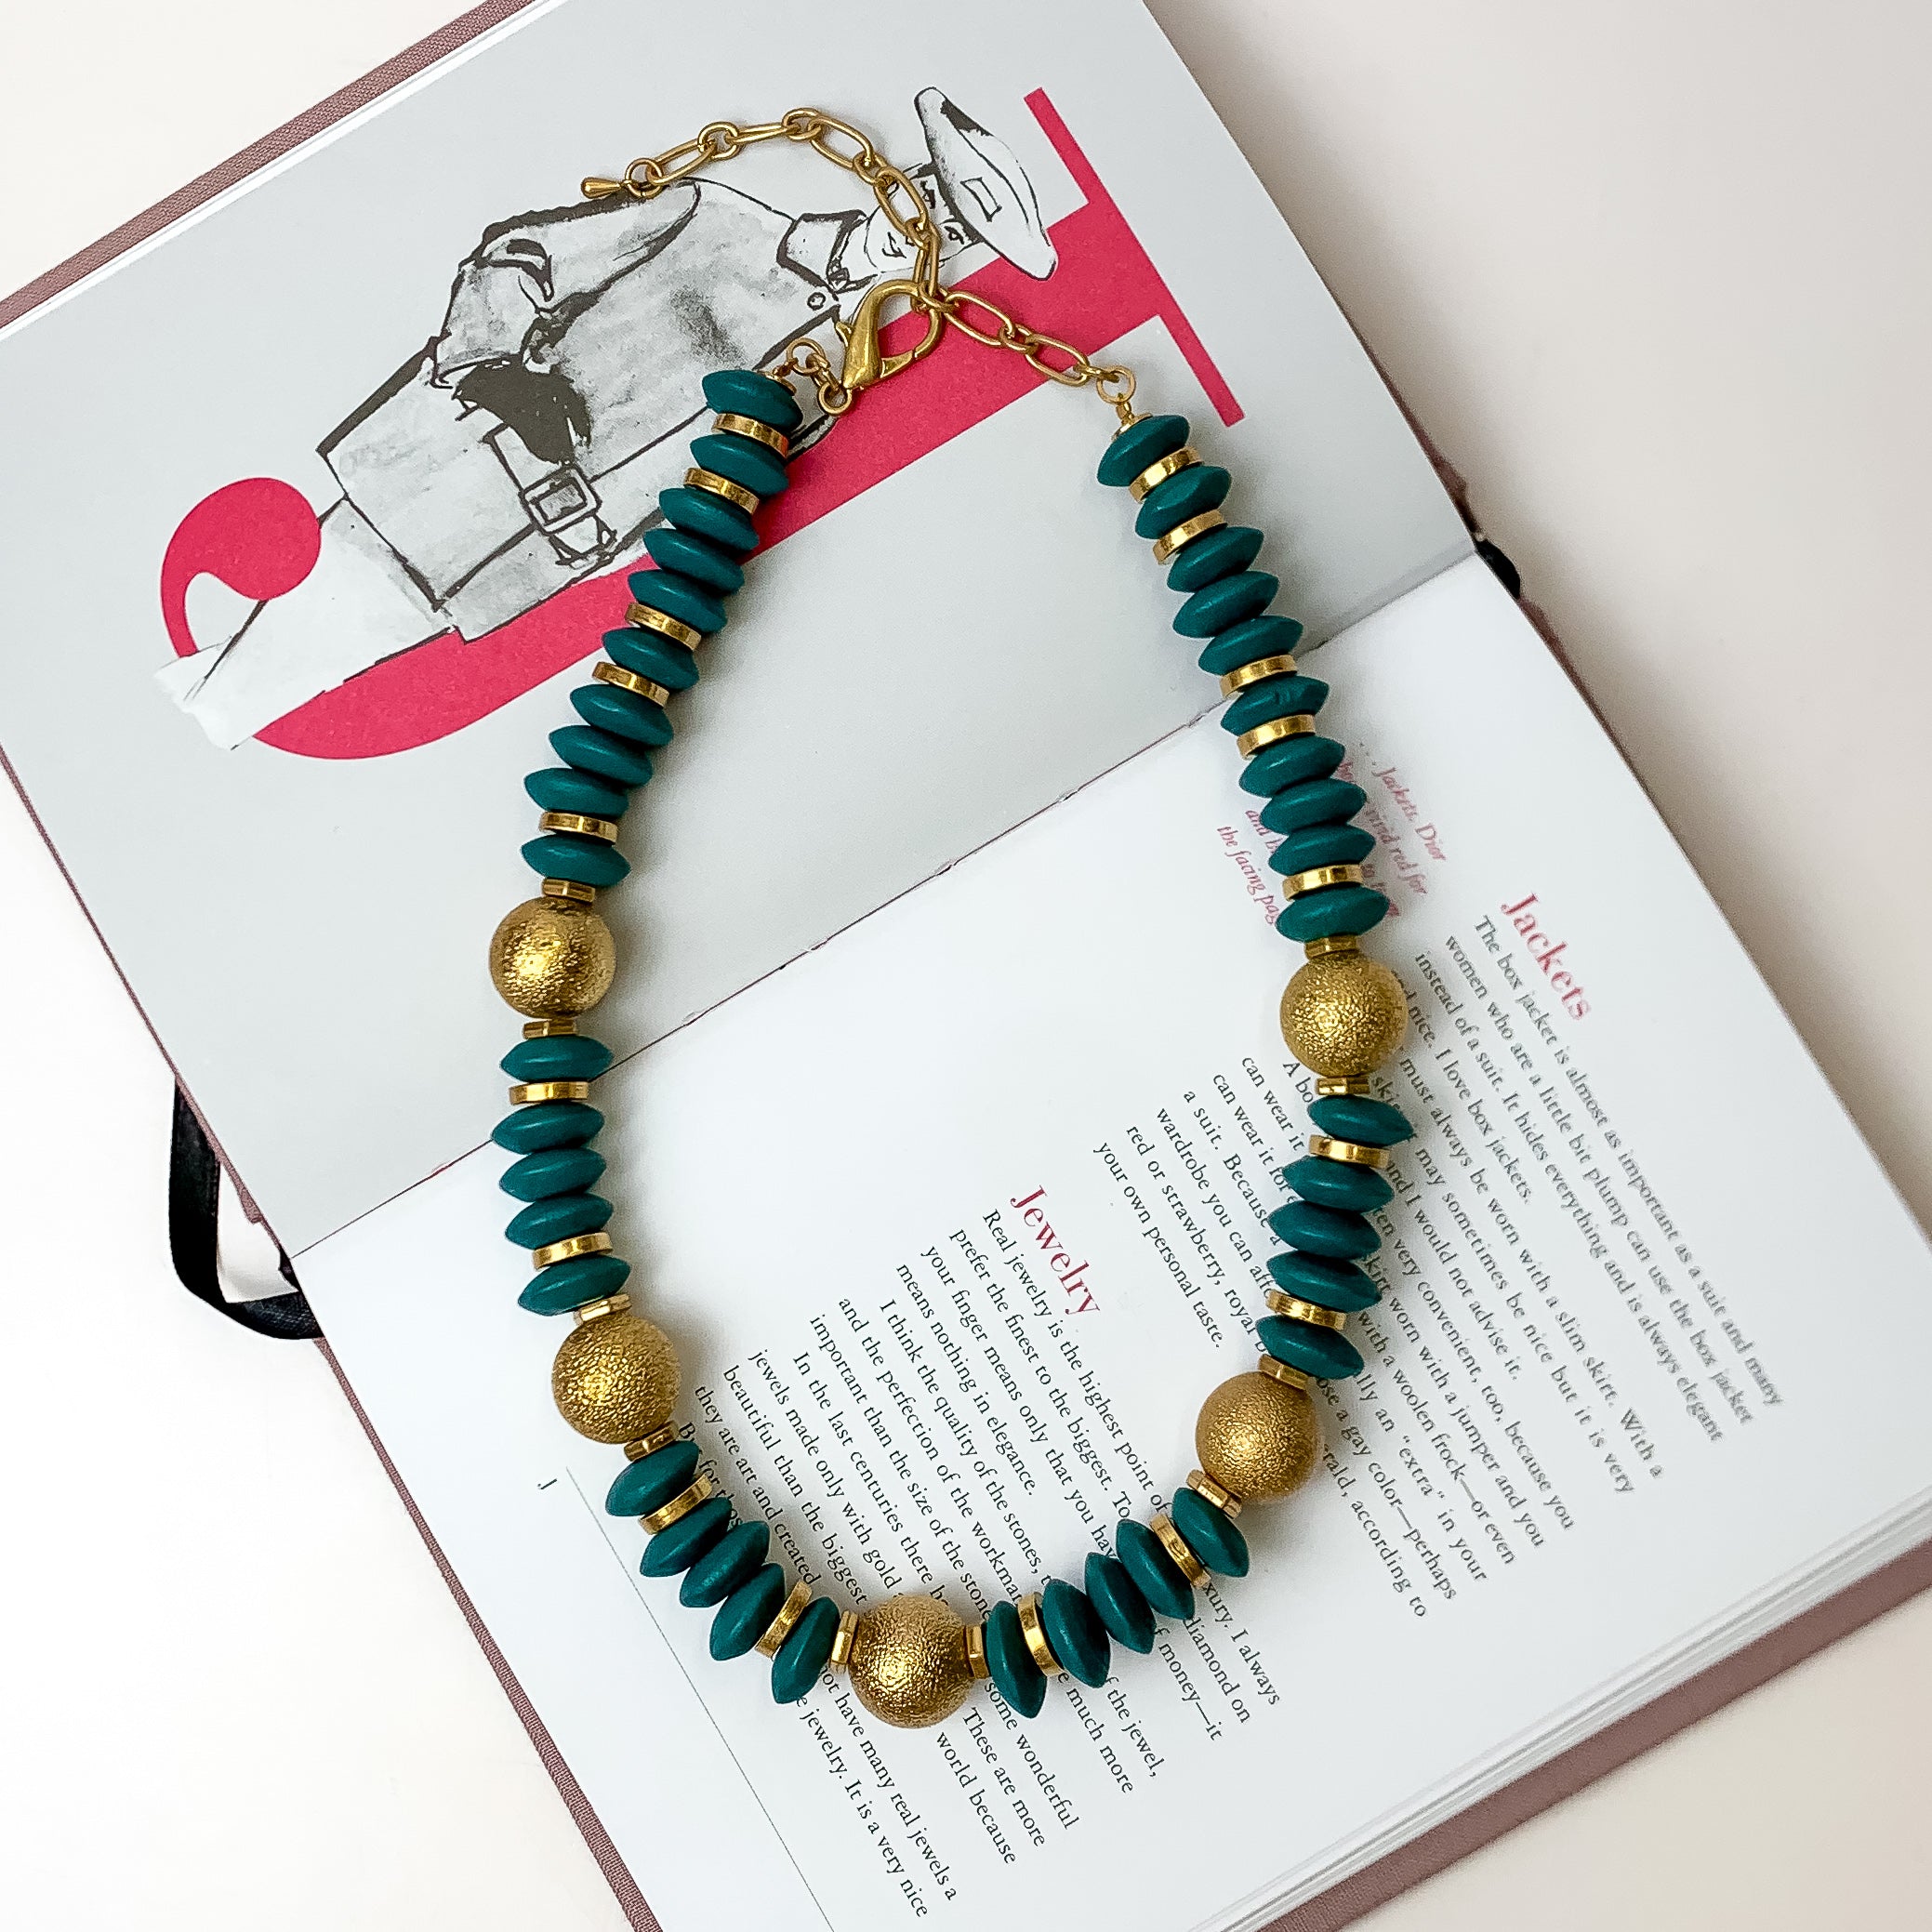 This beaded necklace with gold spacers in the color teal is placed inside the pages of a book with a white background.